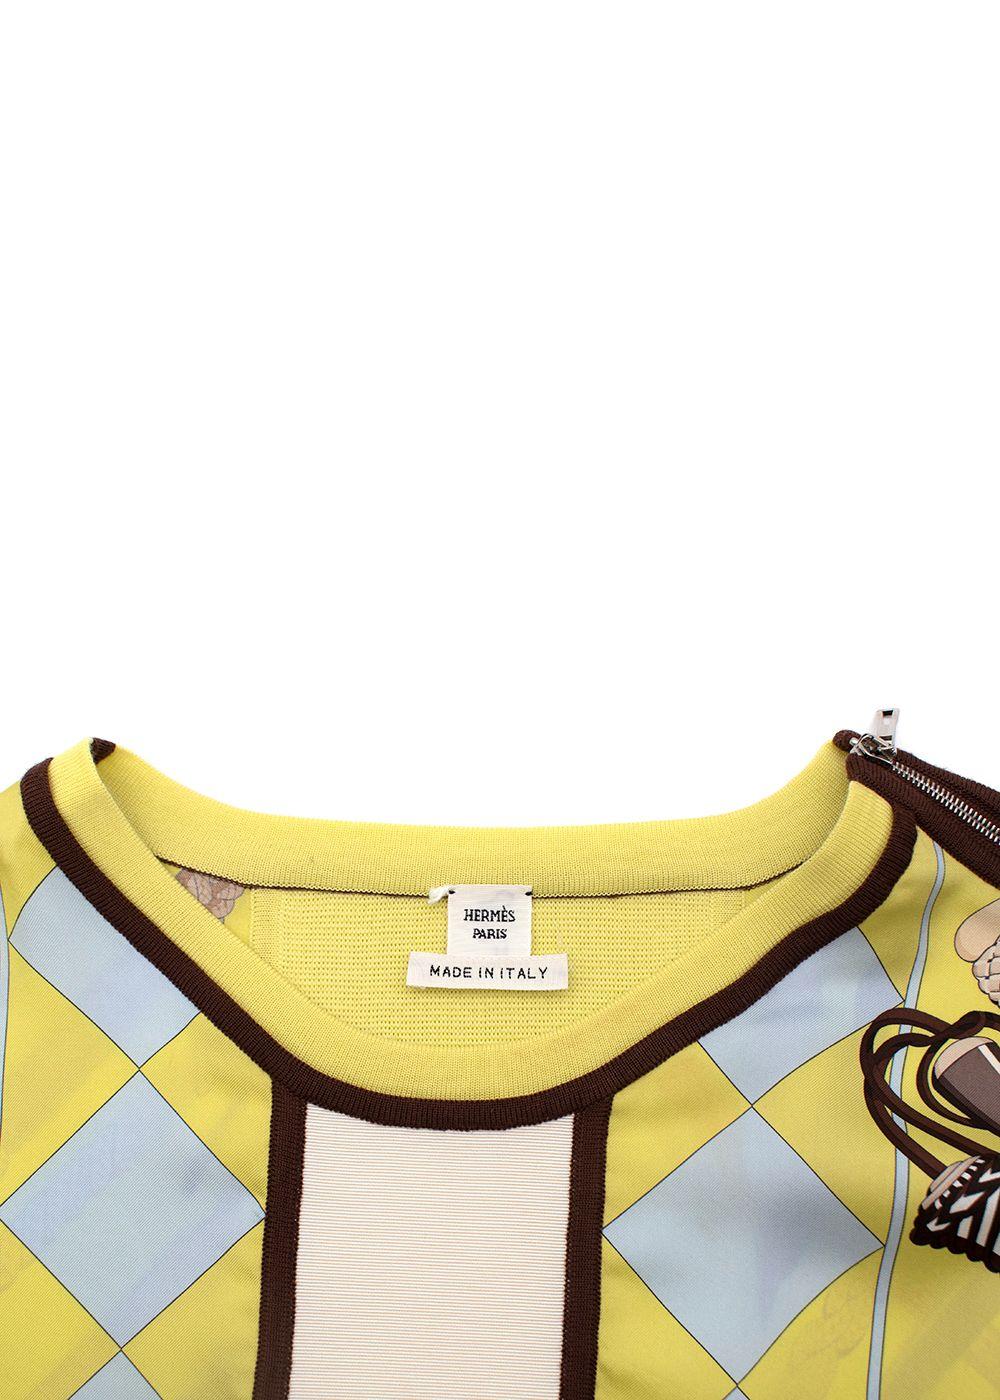 Hermes Yellow & Blue Equestrian Print Silk & Knit Vest - Size 6US In Excellent Condition For Sale In London, GB